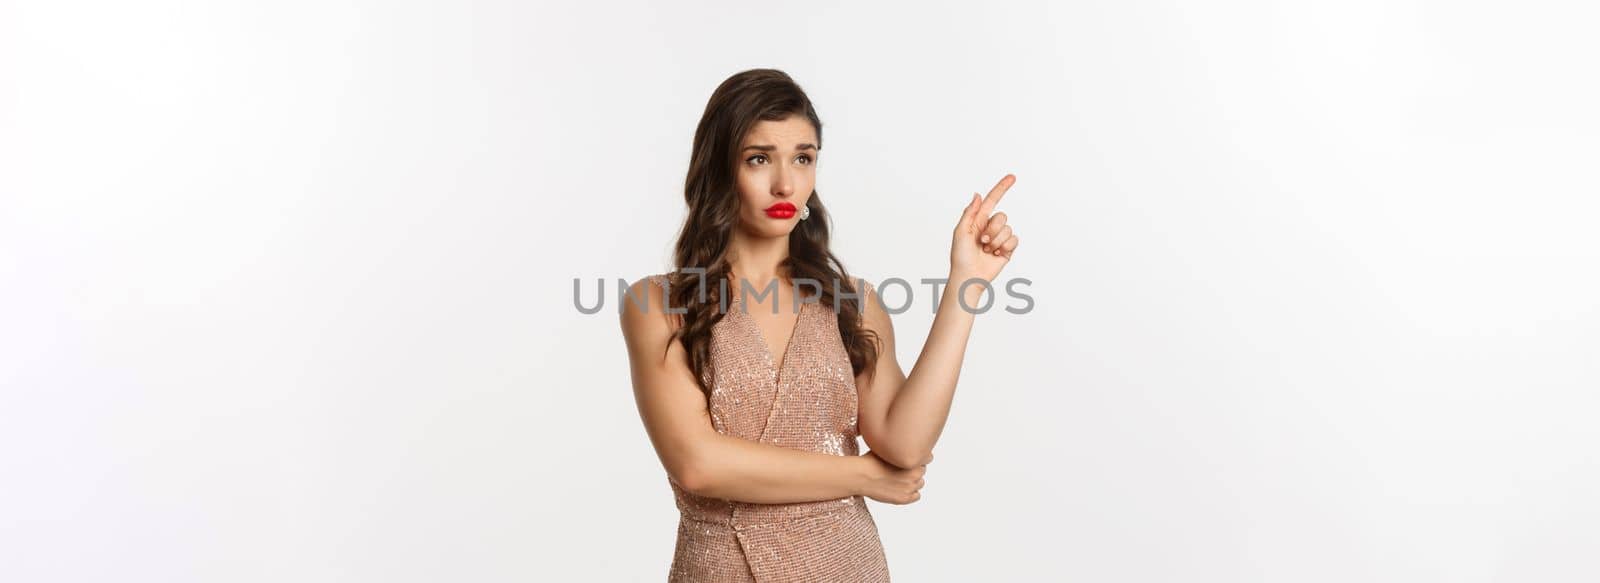 Christmas, holidays and celebration concept. Skeptical and displeased woman in stylish party dress, pointing finger left and starring at banner unamused, white background.